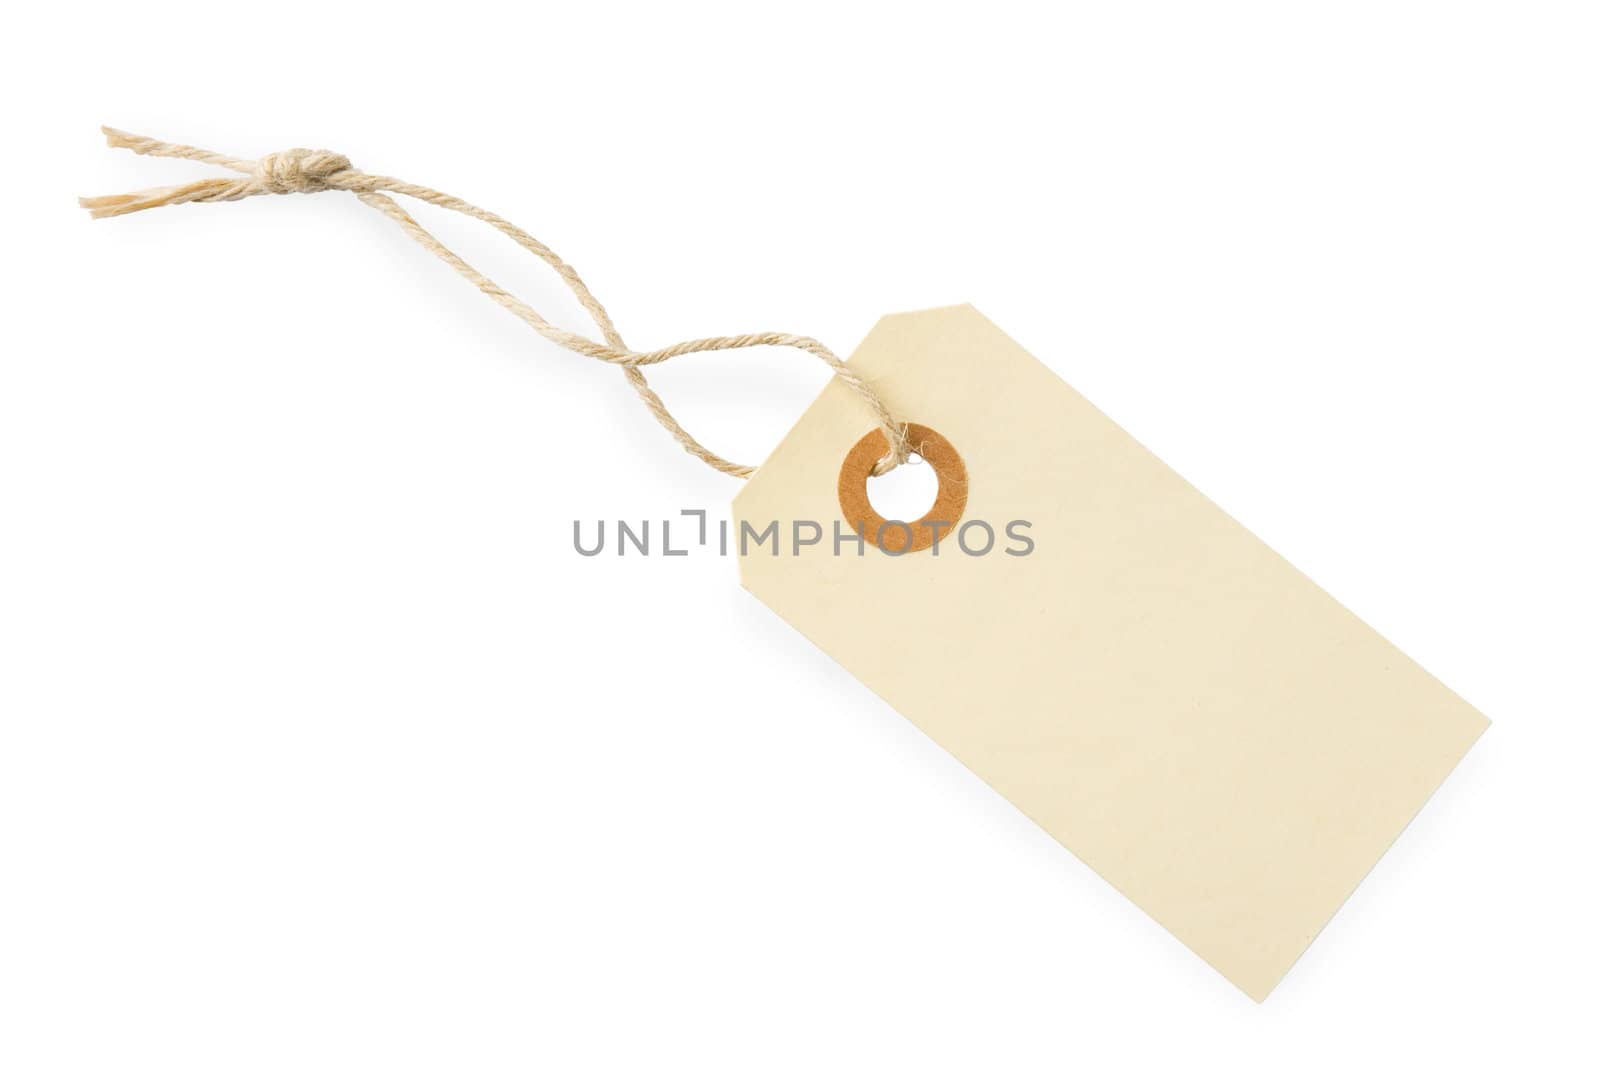 Blank paper tag with cotton string isolated on white background with shadow